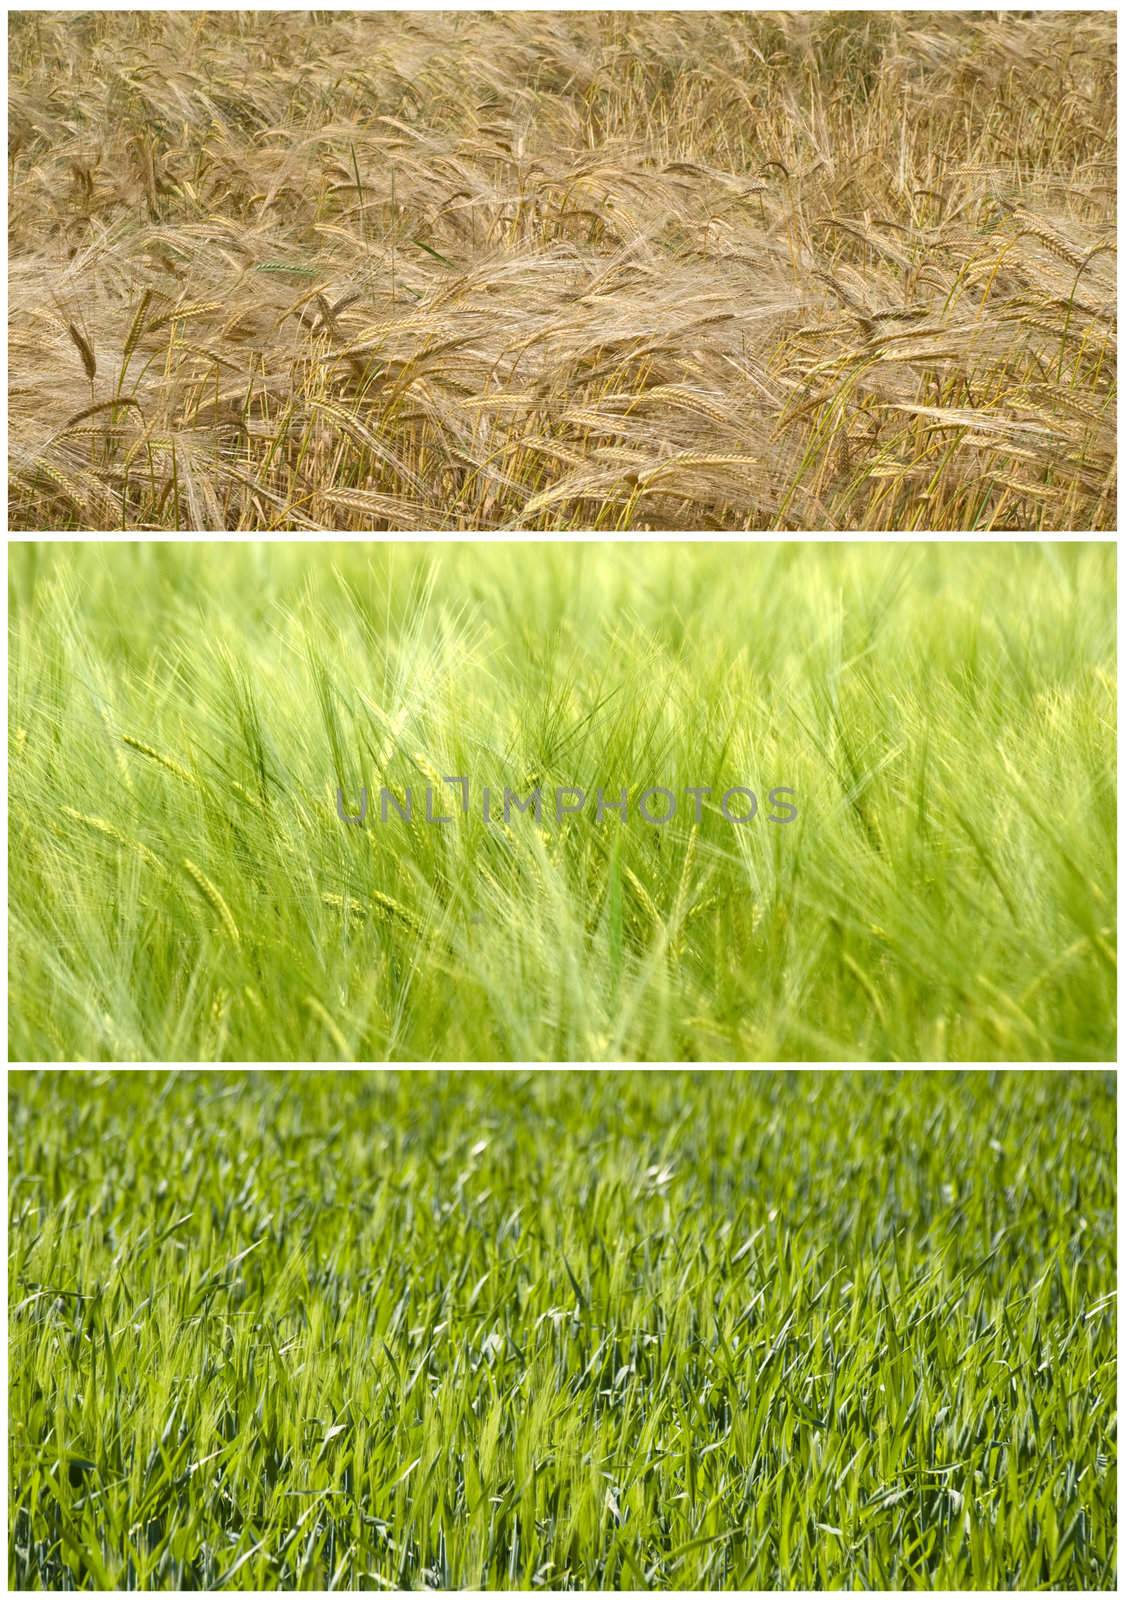 composite picture of a wheat durum field showing the evolution from  Spring to Summer